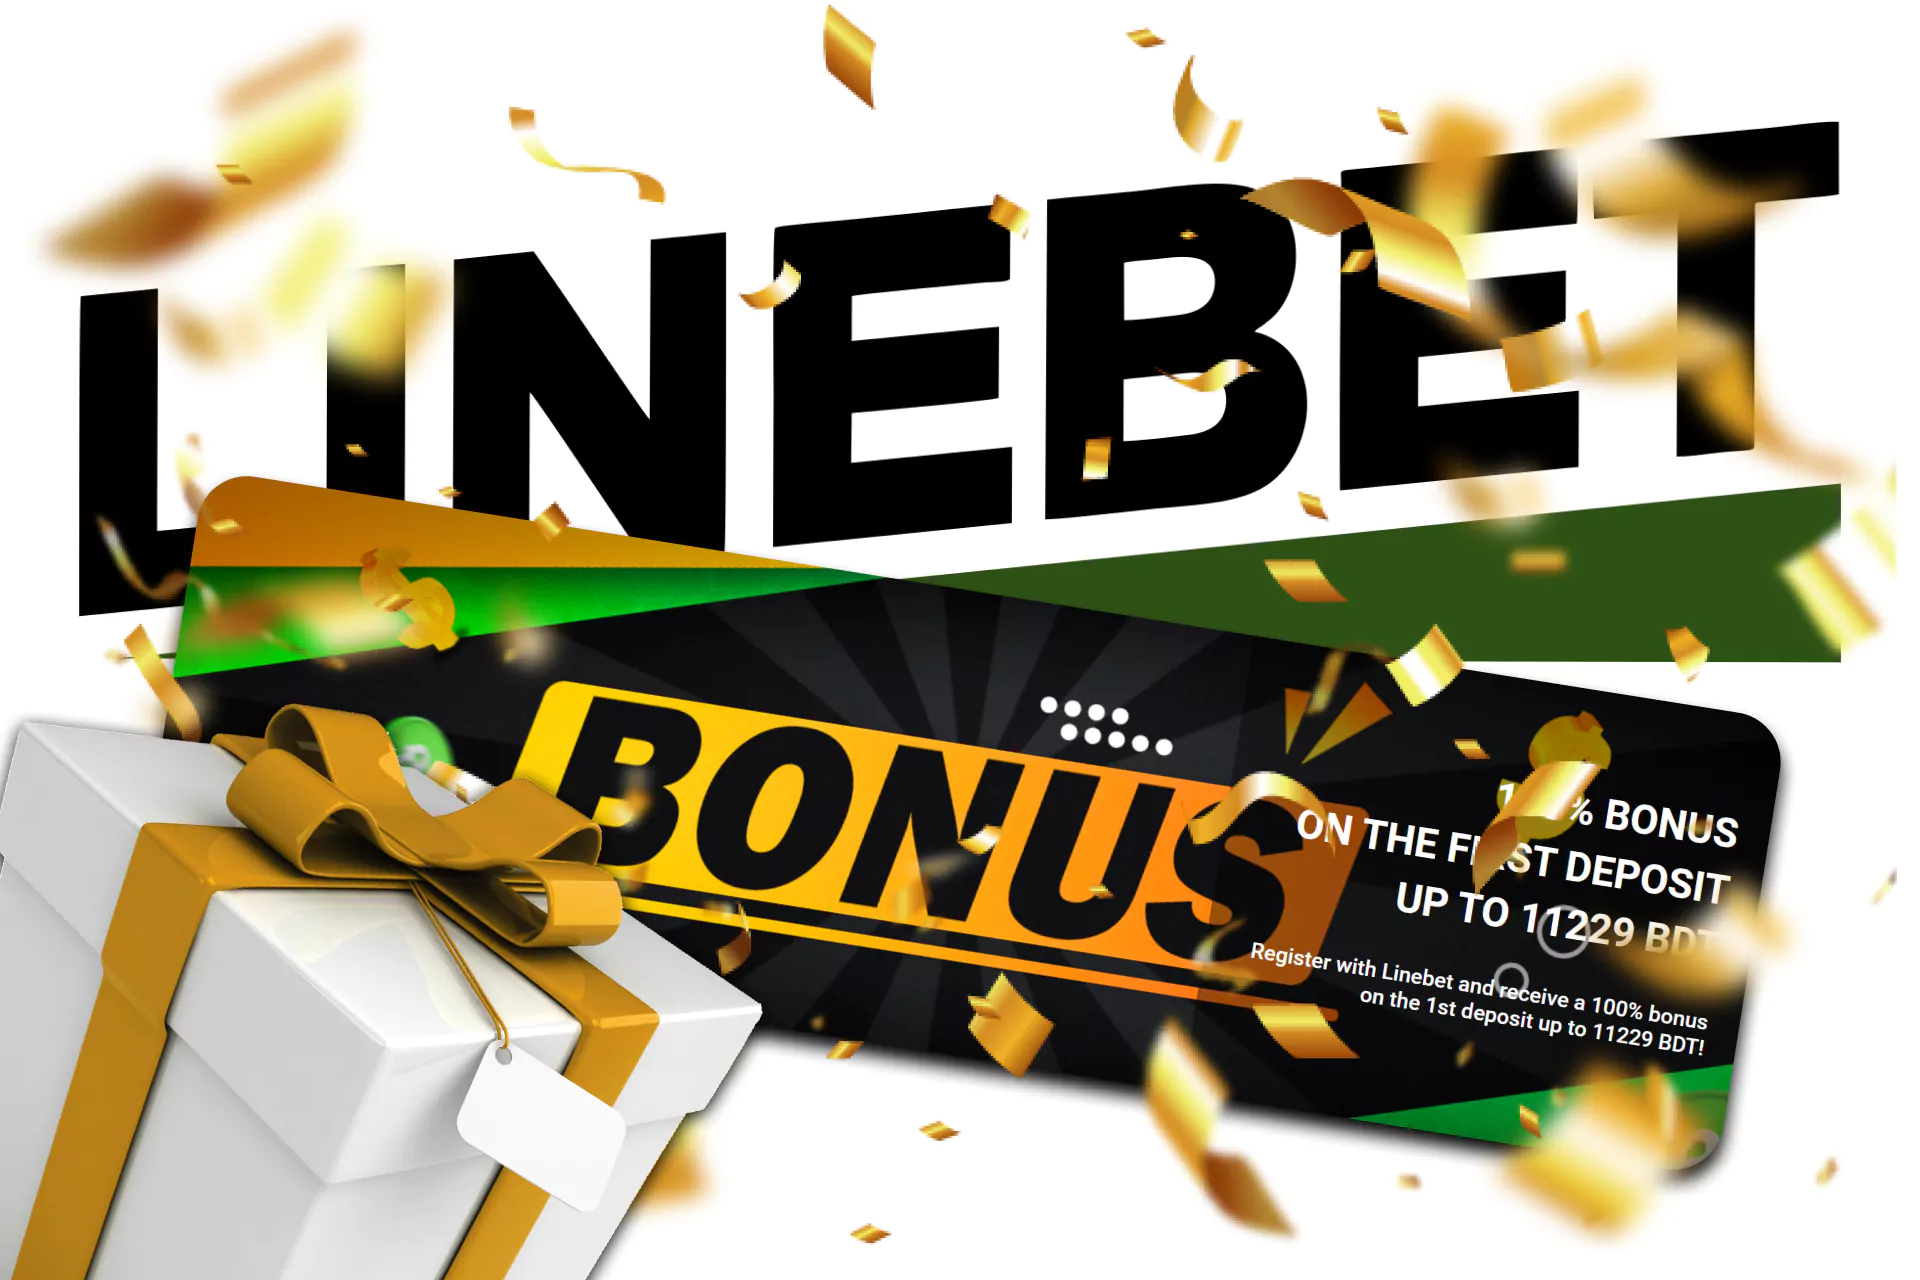 Fund your account and get bonuses for betting on Linebet events.